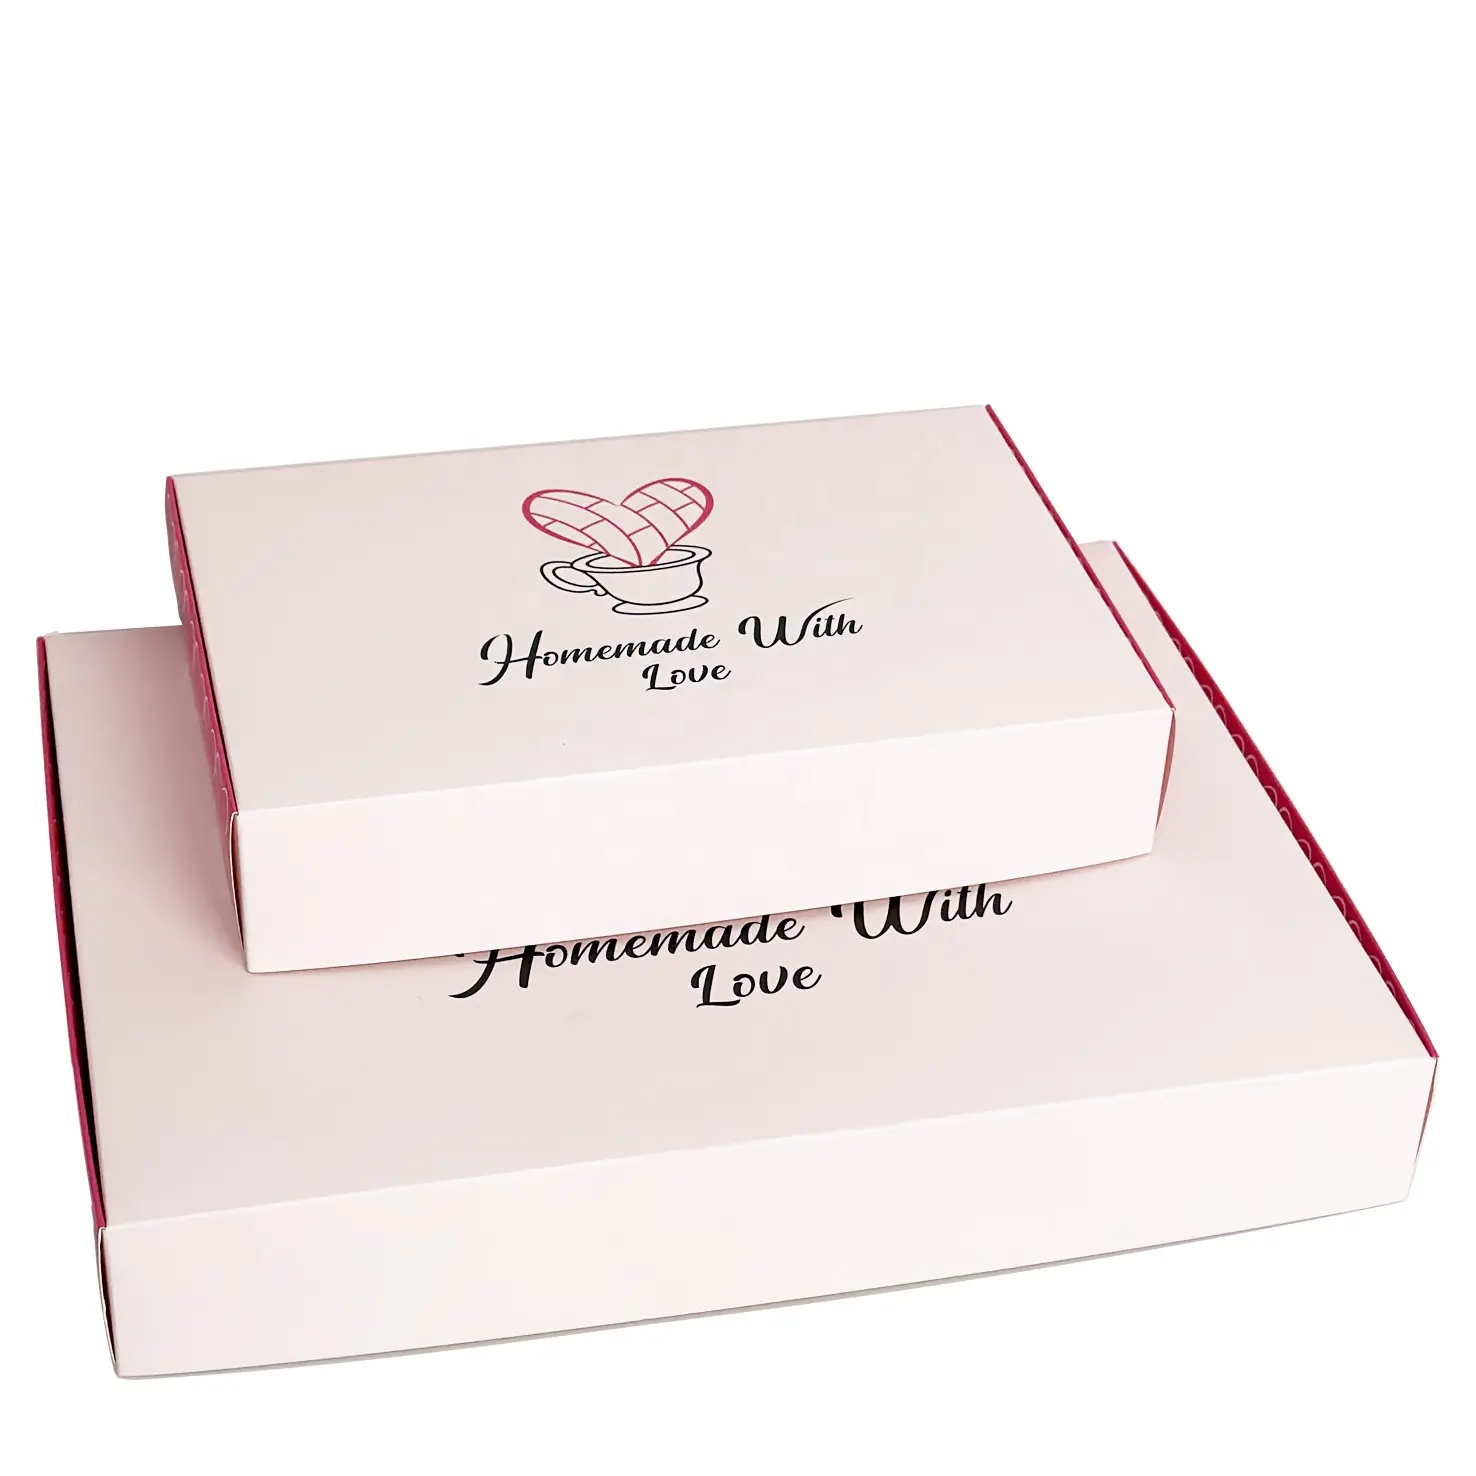 Matte Coating Printing On Front And Back Desserts Good Price Cake Cardboard Boxes Packaging